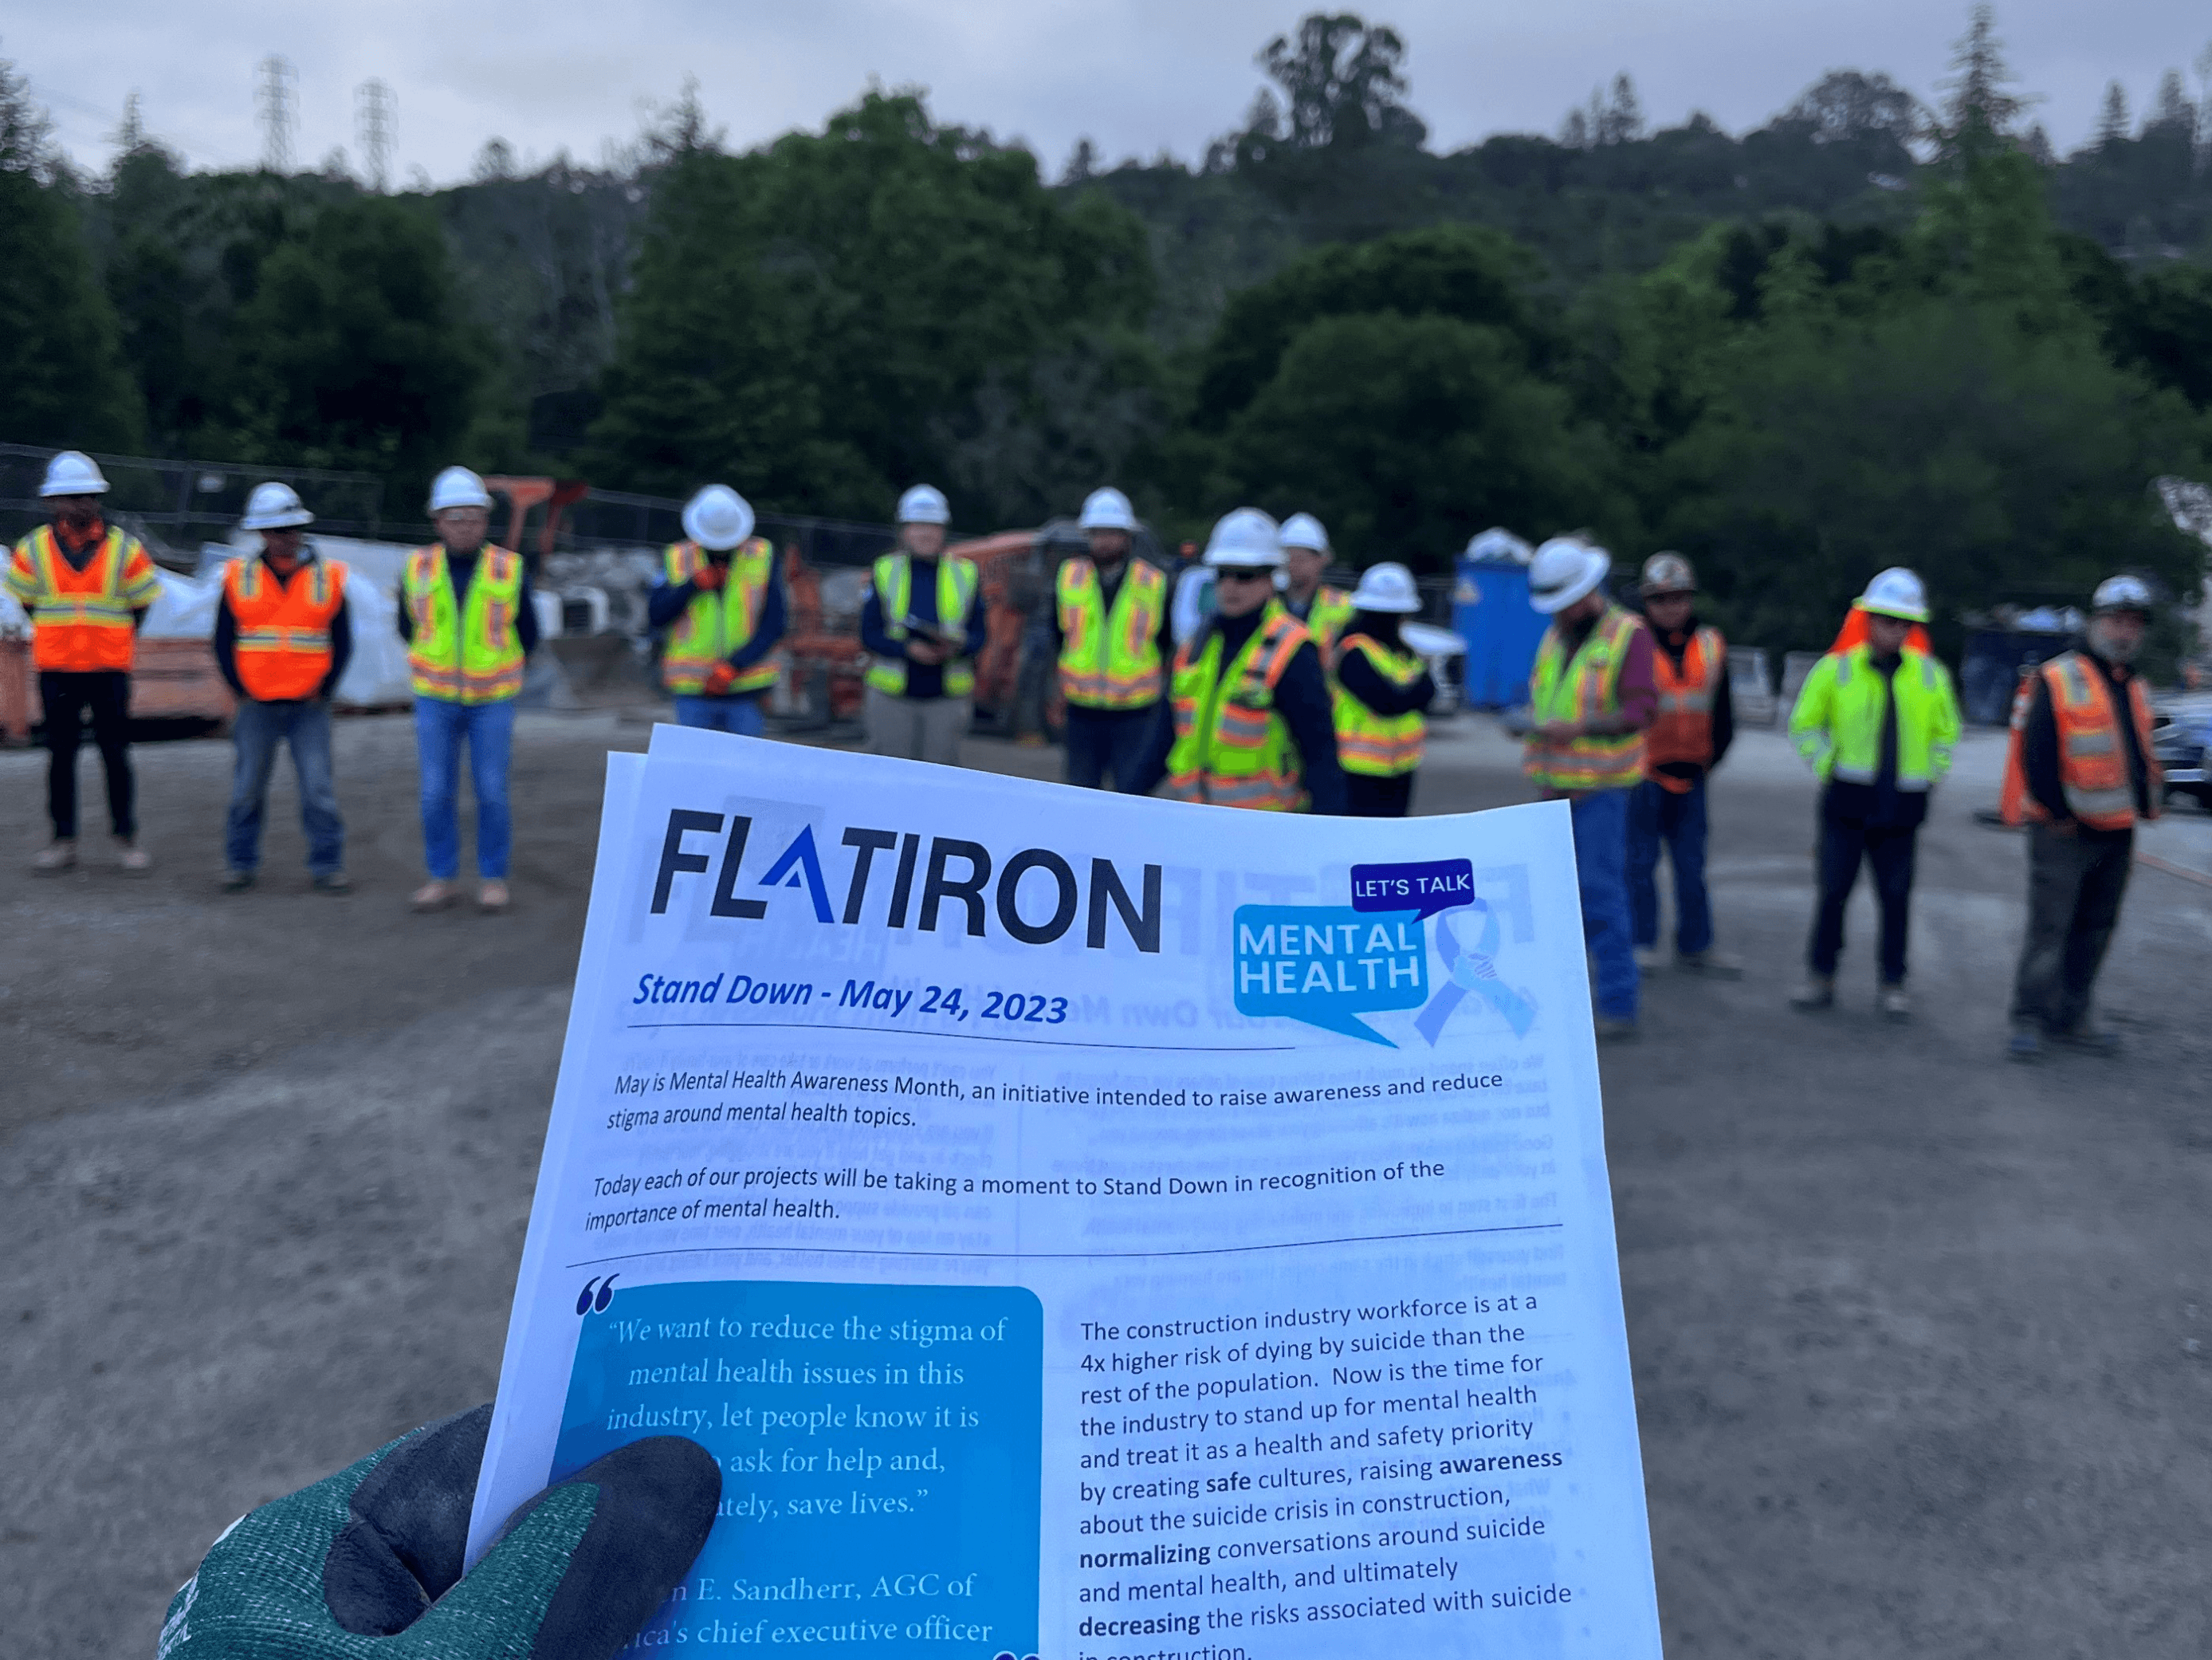 Flatiron held stand downs in May in recognition of mental health, especially in the construction industry. This is an image of one of the stand downs.